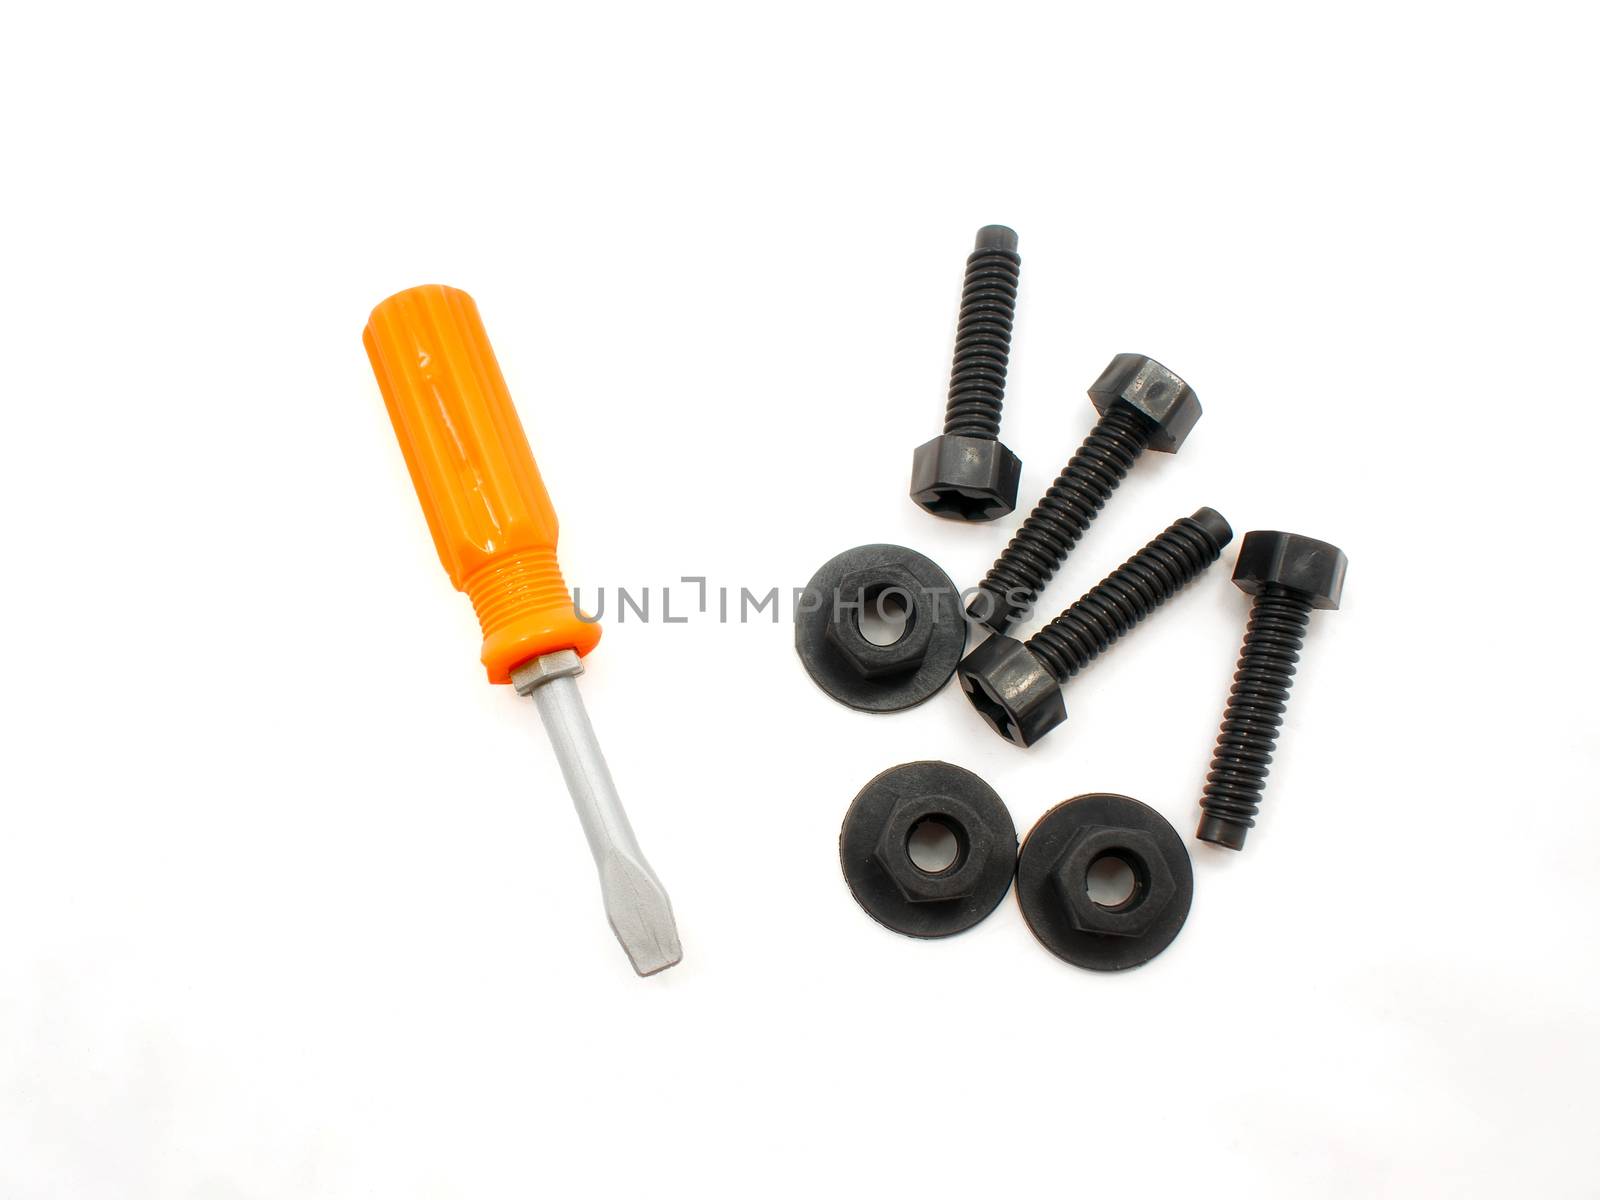 Set of Children's Screwdriver, Screws and Nuts